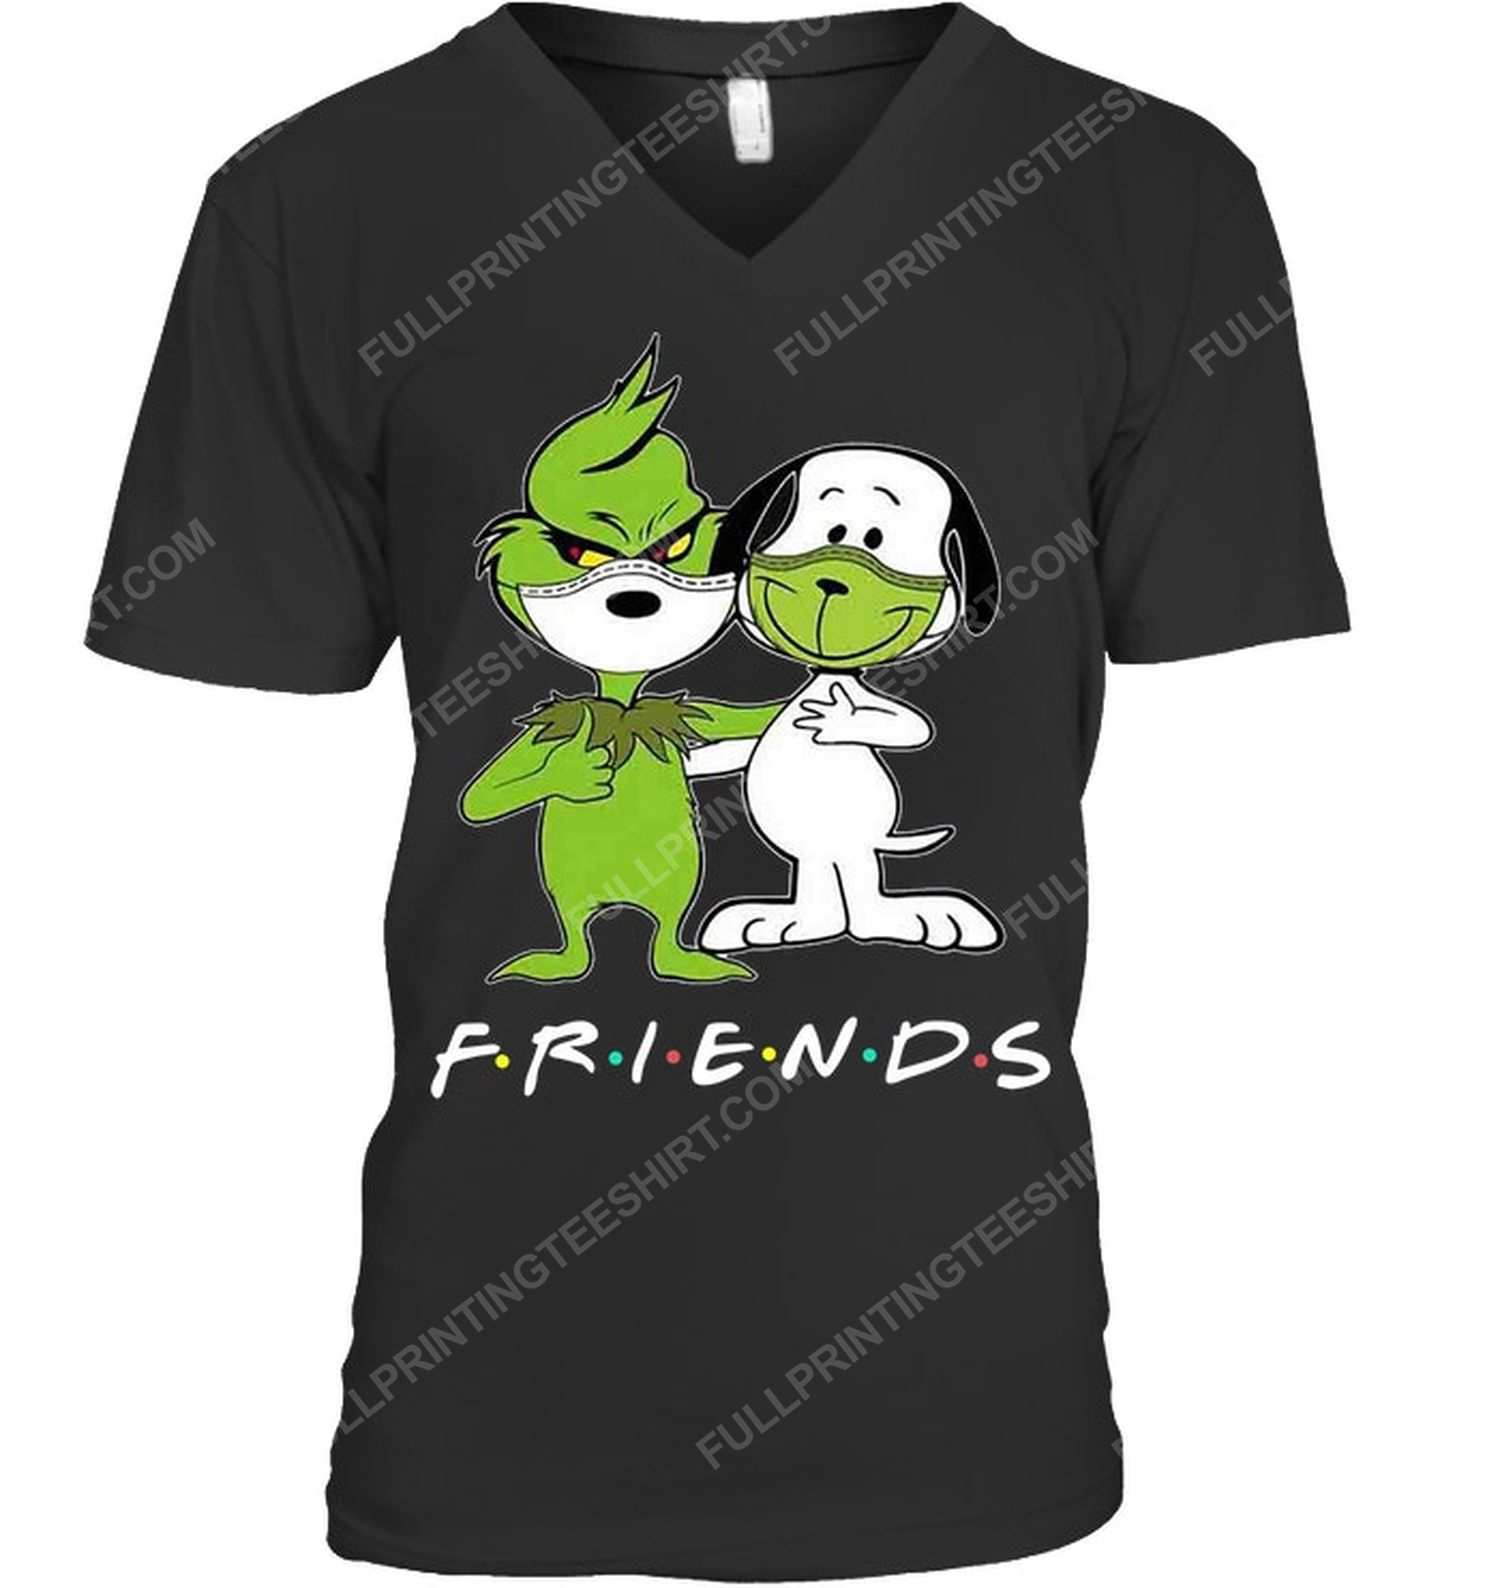 The grinch and snoopy friends tv show v-neck